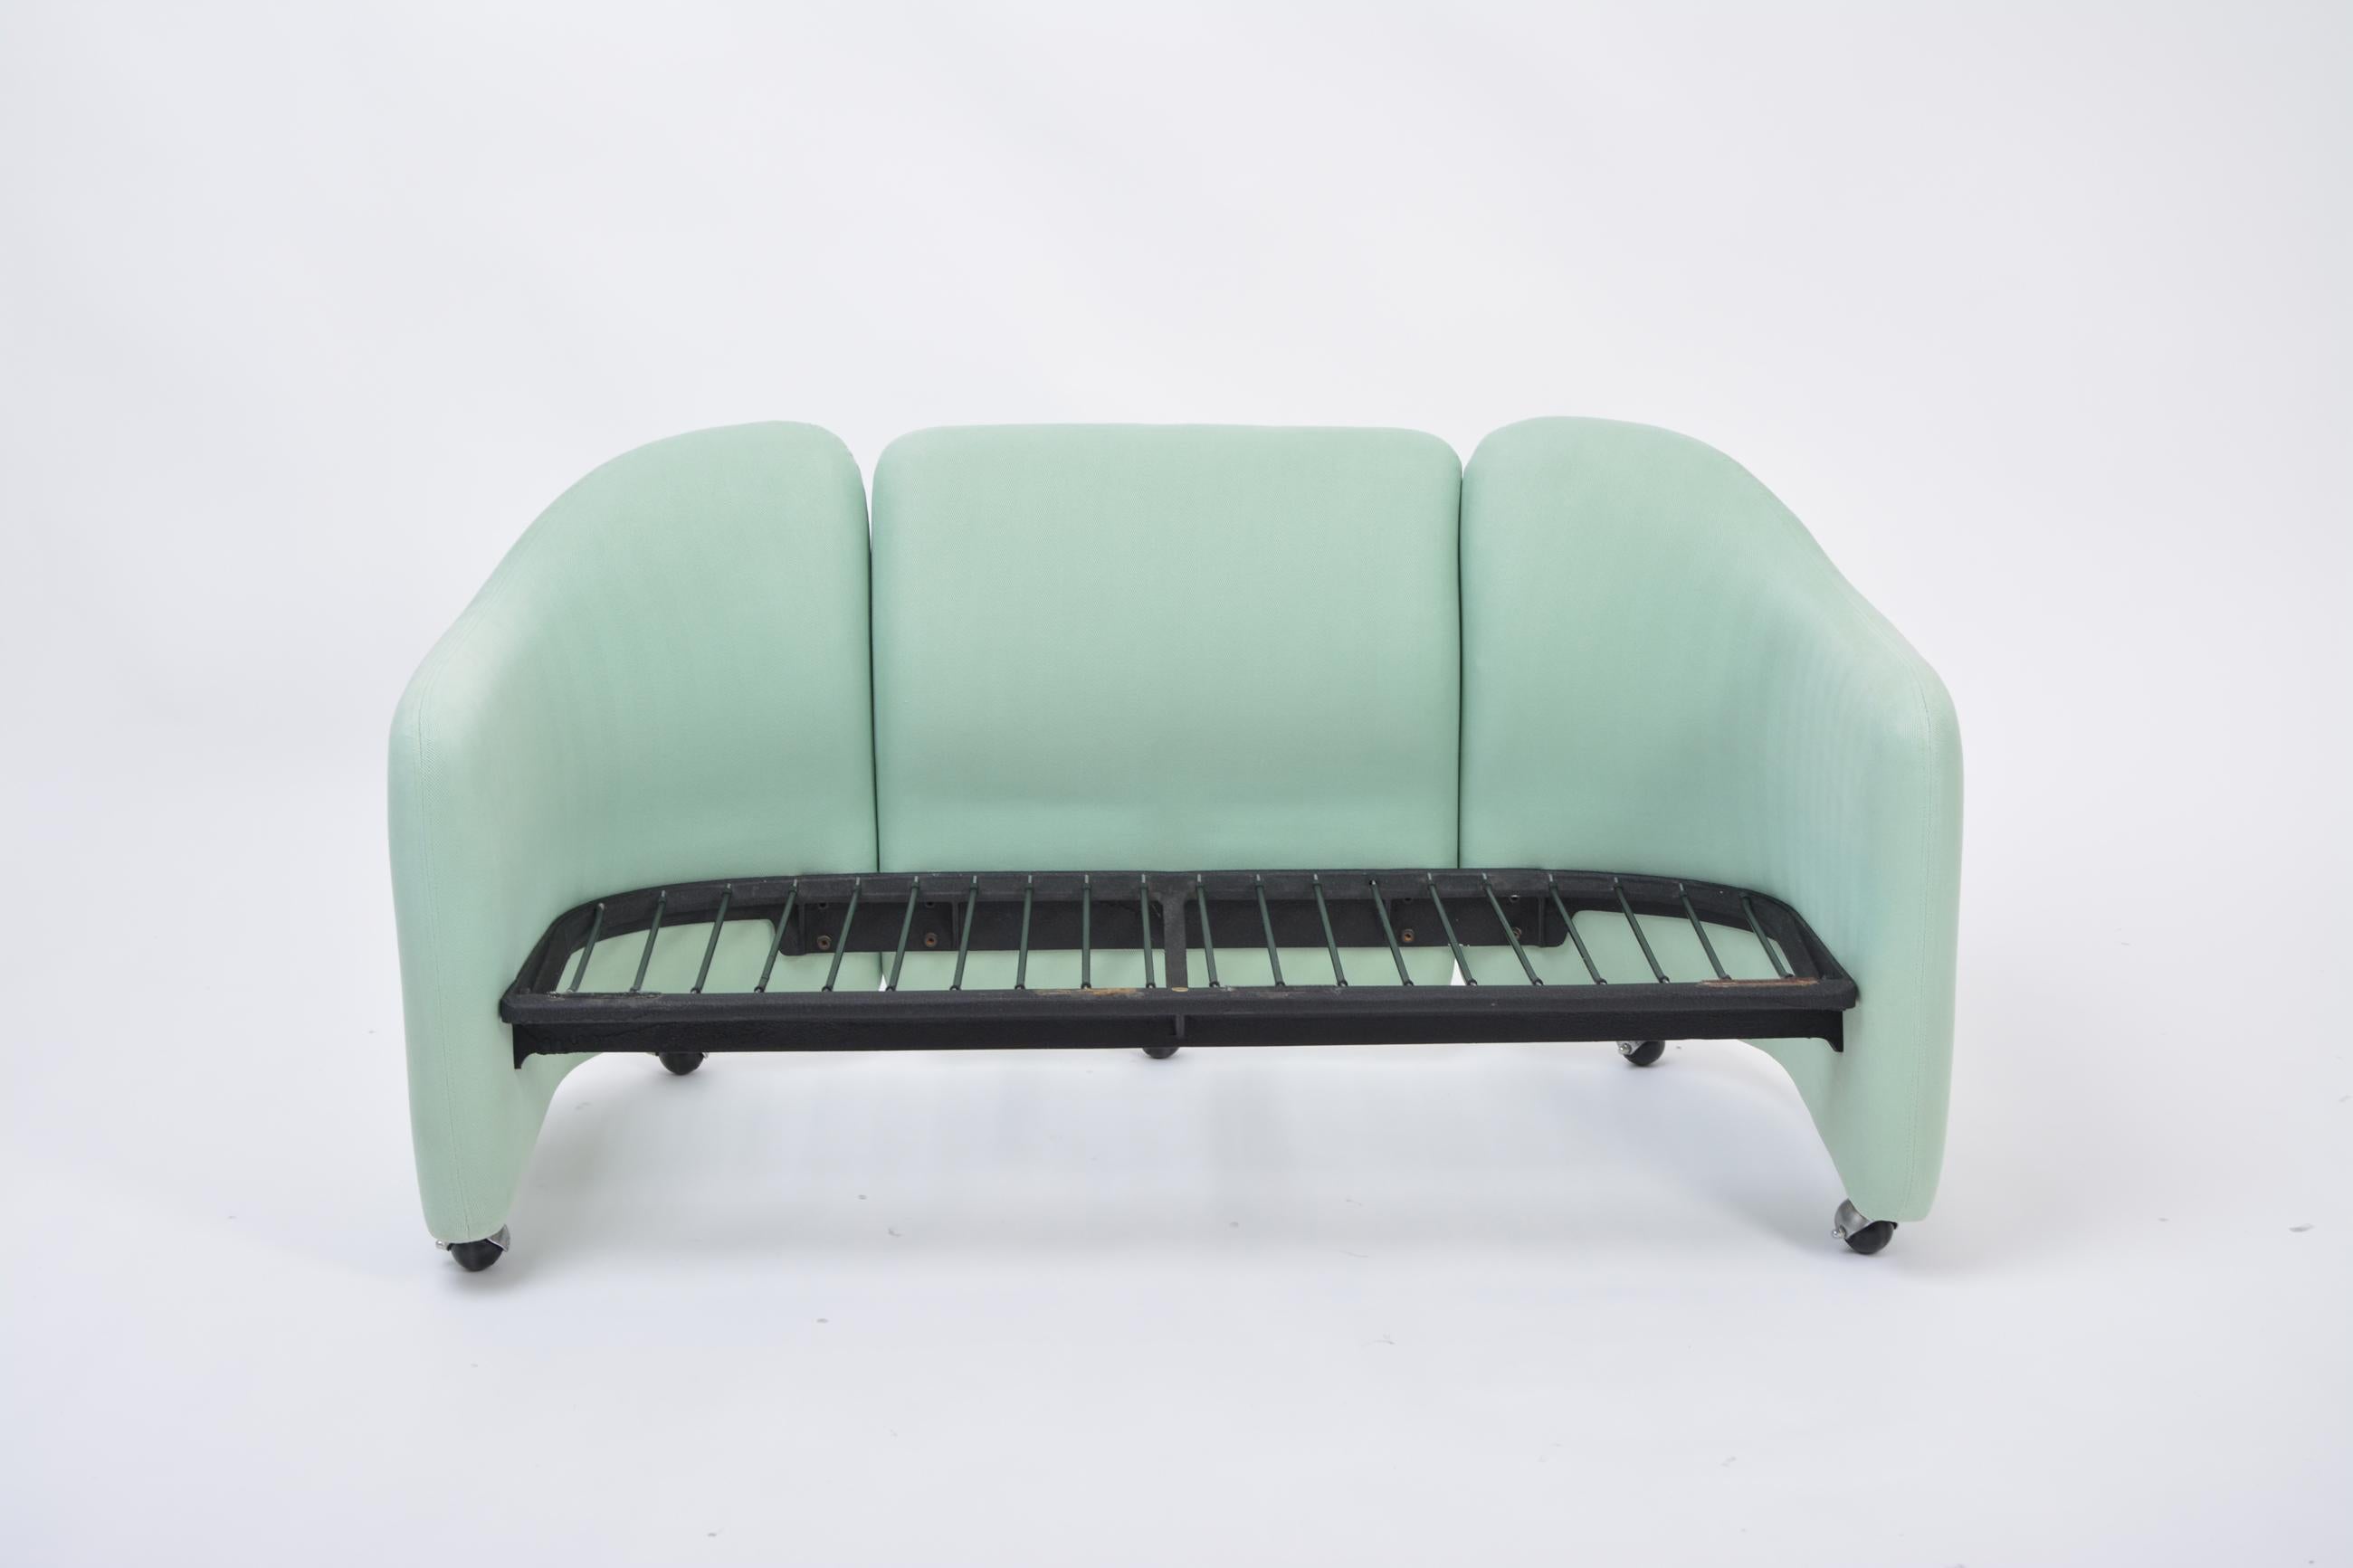 Italian Mid-Century Modern Two-Seater Sofa by Eugenio Gerli for Tecno, 1966 For Sale 3